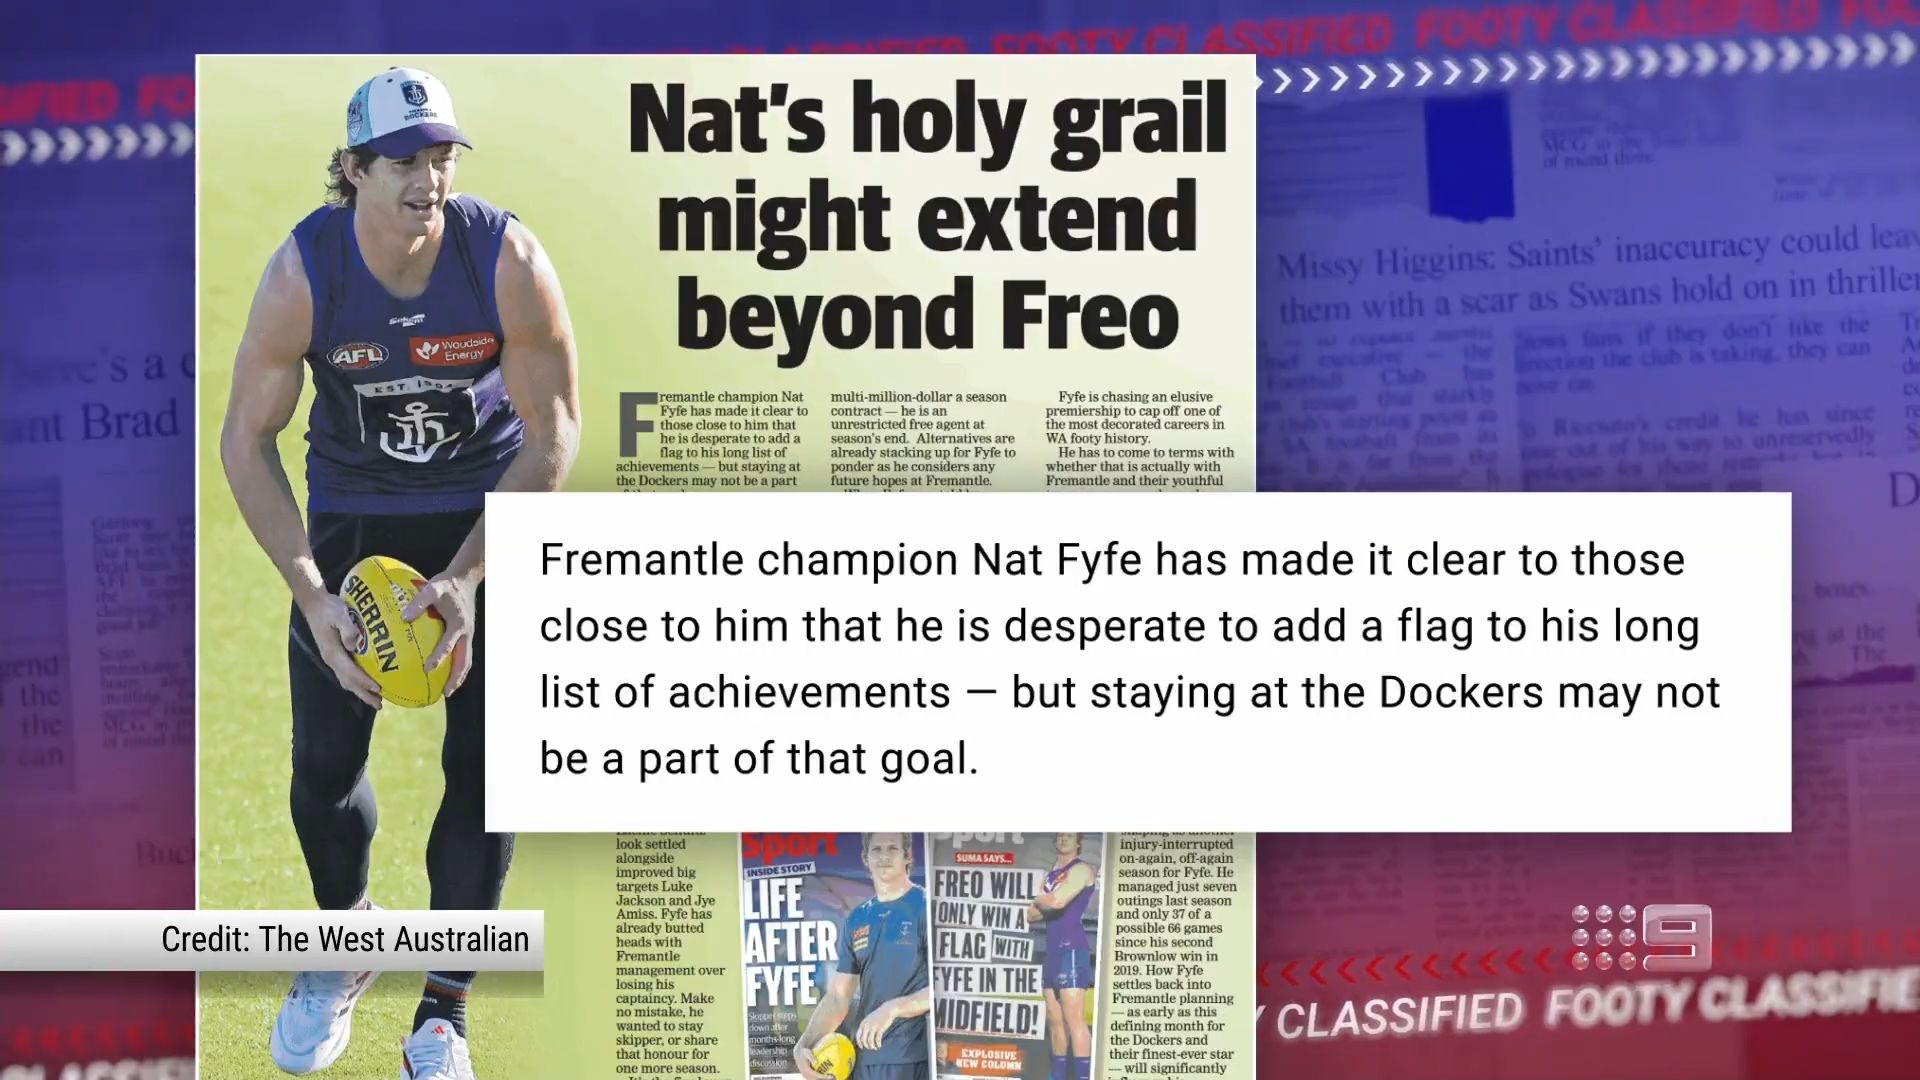 Deal-breaker for Nat Fyfe move as three clubs named as possible trade destinations